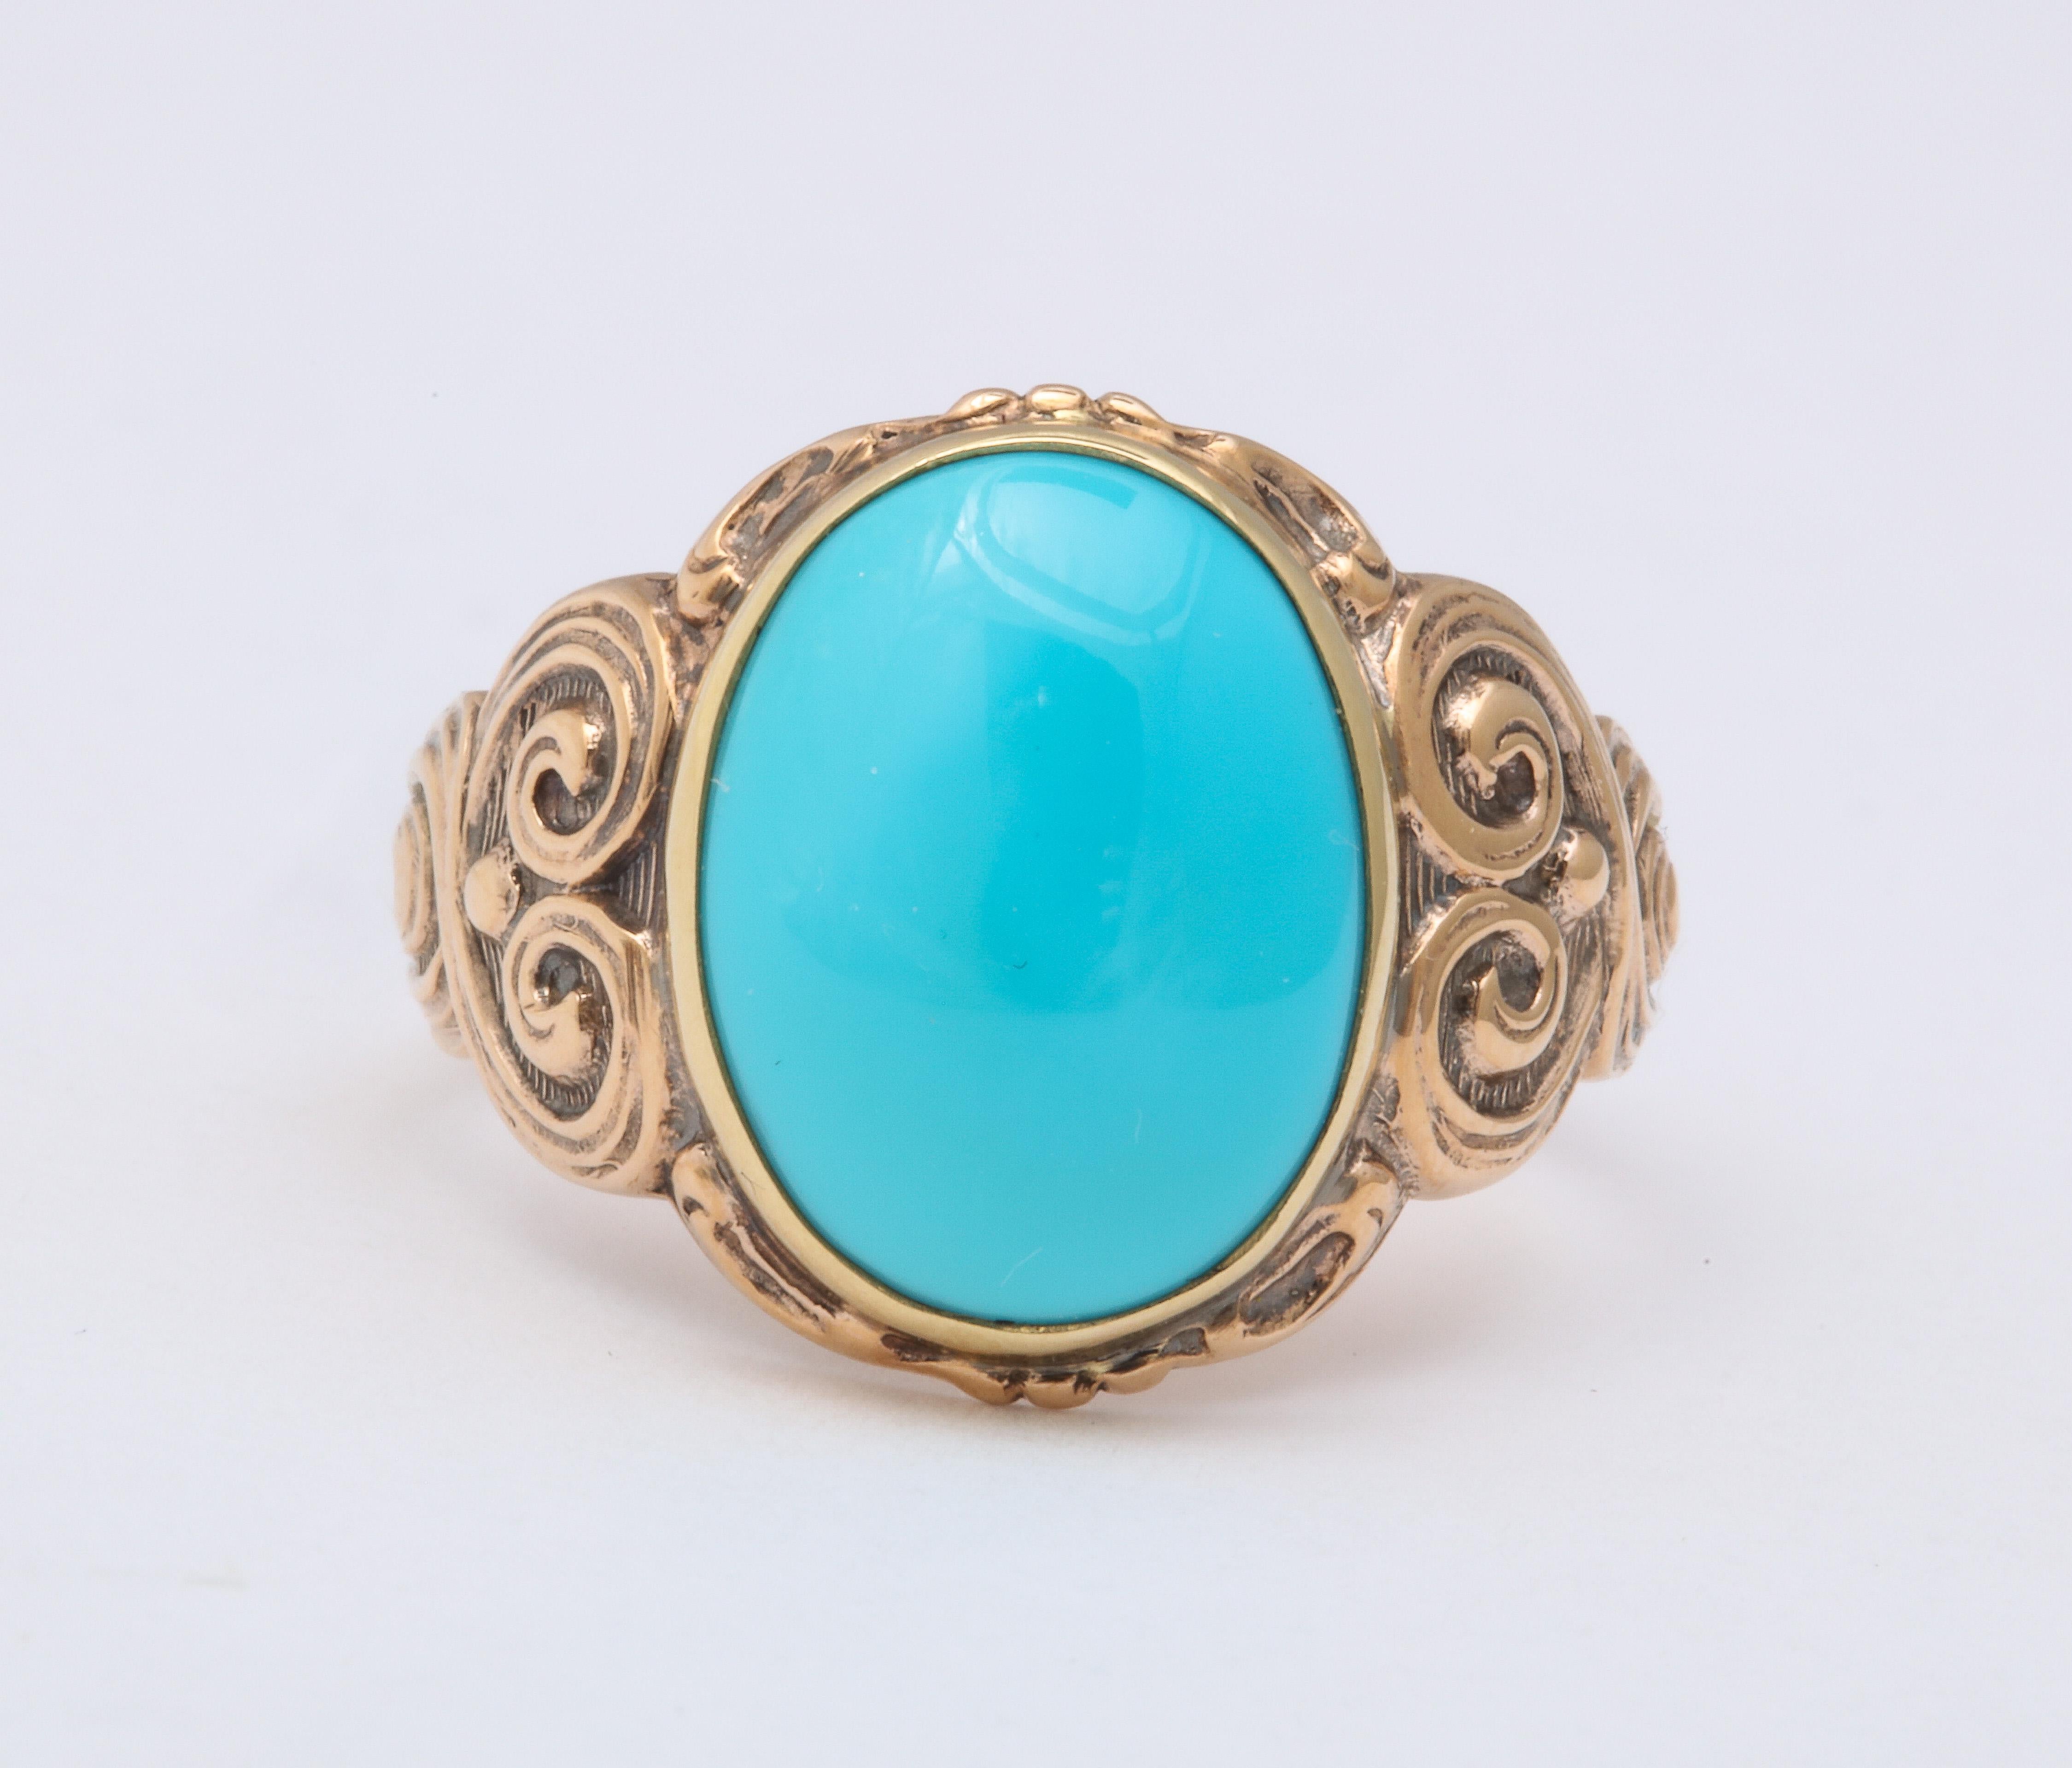 A 5.5 ct oval turquoise ring is cut in cabochon and set in a 14 kt engraved shank. The shank tapers from its repousse swirls on the shoulders. The ring is all original. The engraving travels half way around the finger. The collet keeps the turquoise